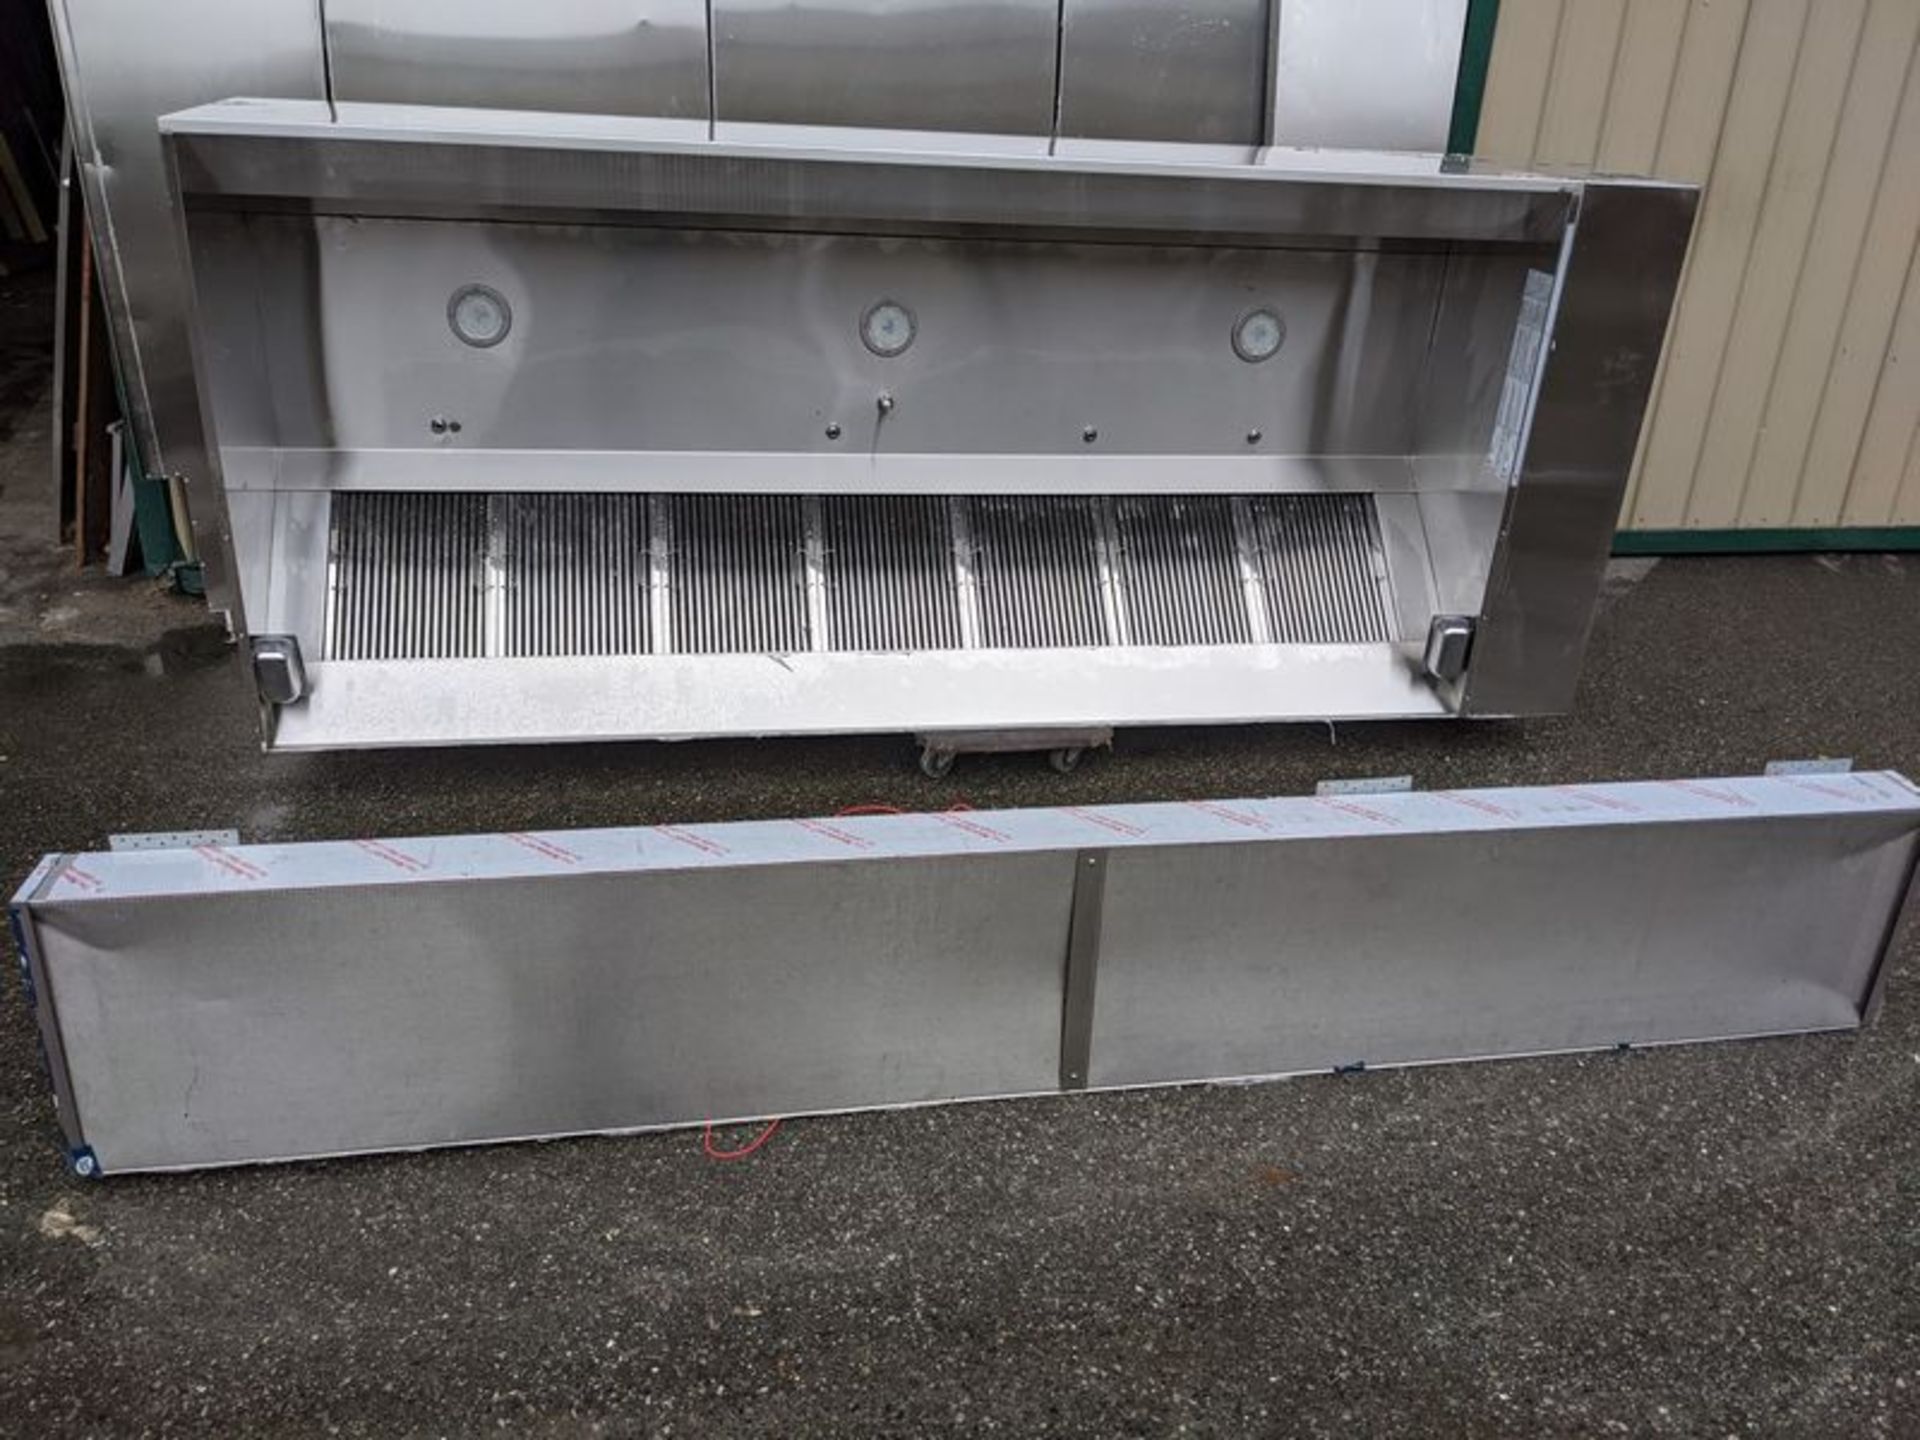 Captive Air 10 Foot Stainless Steel Canopy with Fire Suppression Make Up Air, Backsplash & Fan - Bild 2 aus 5